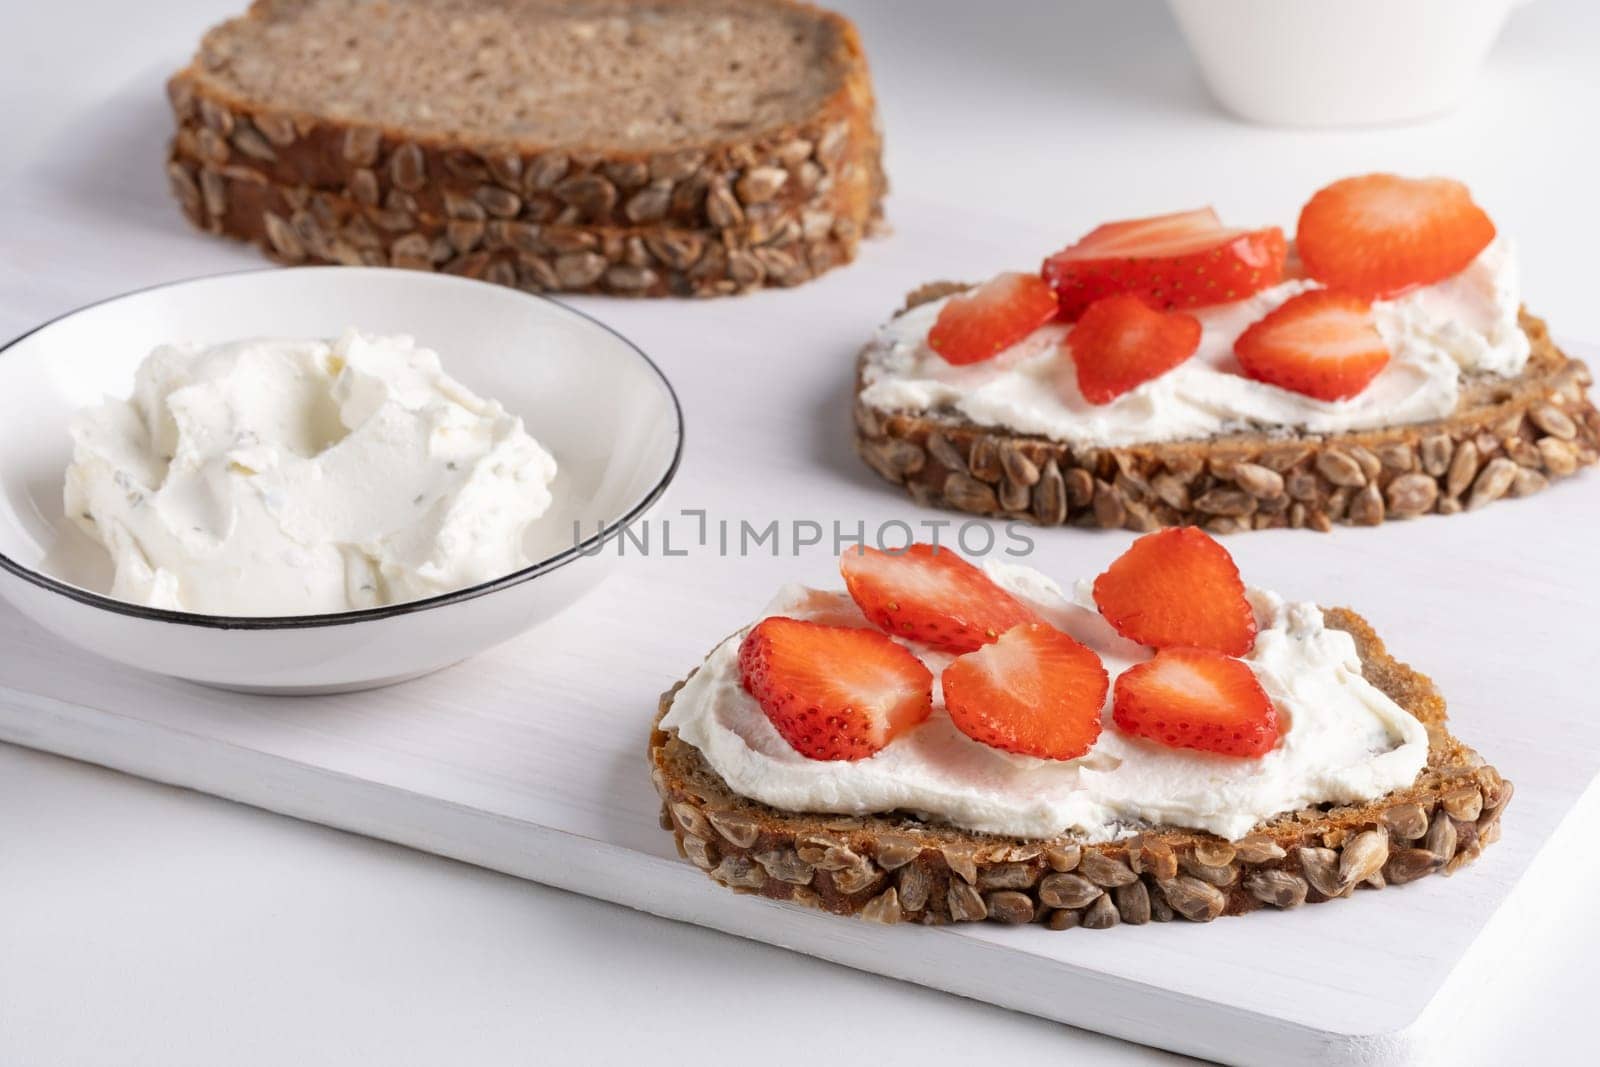 Rye bread with cream cheese and strawberry on a white table. Whole grain rye bread with seeds.